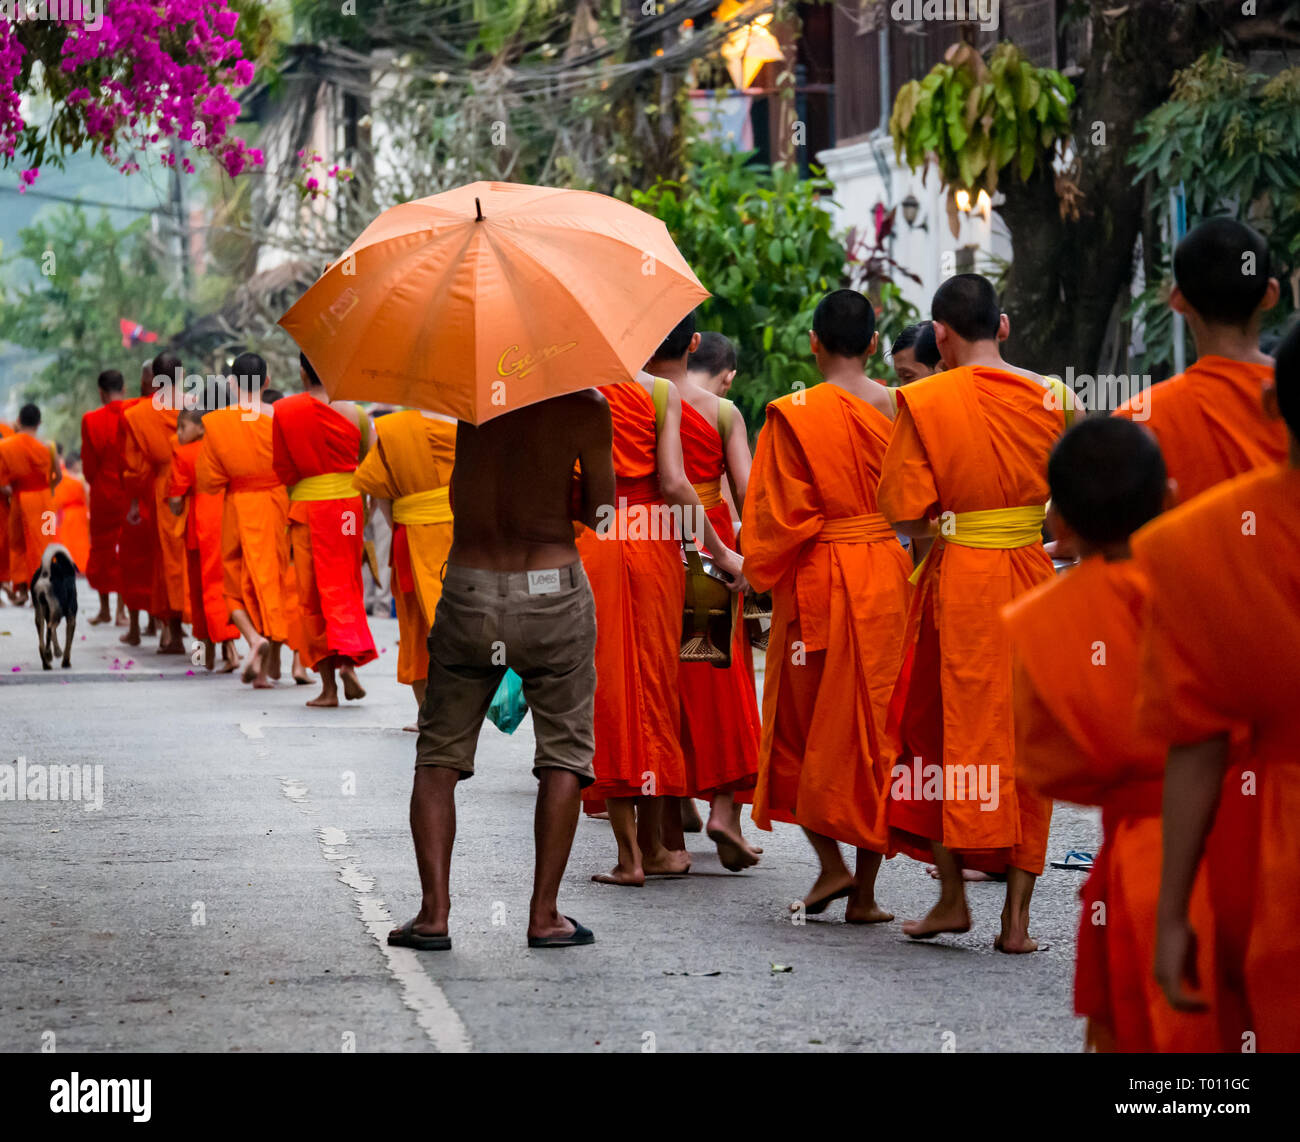 Black man with orange umbrella watches Buddhist monks in orange robes queue for morning alms giving ceremony, Luang Prabang, Laos Stock Photo